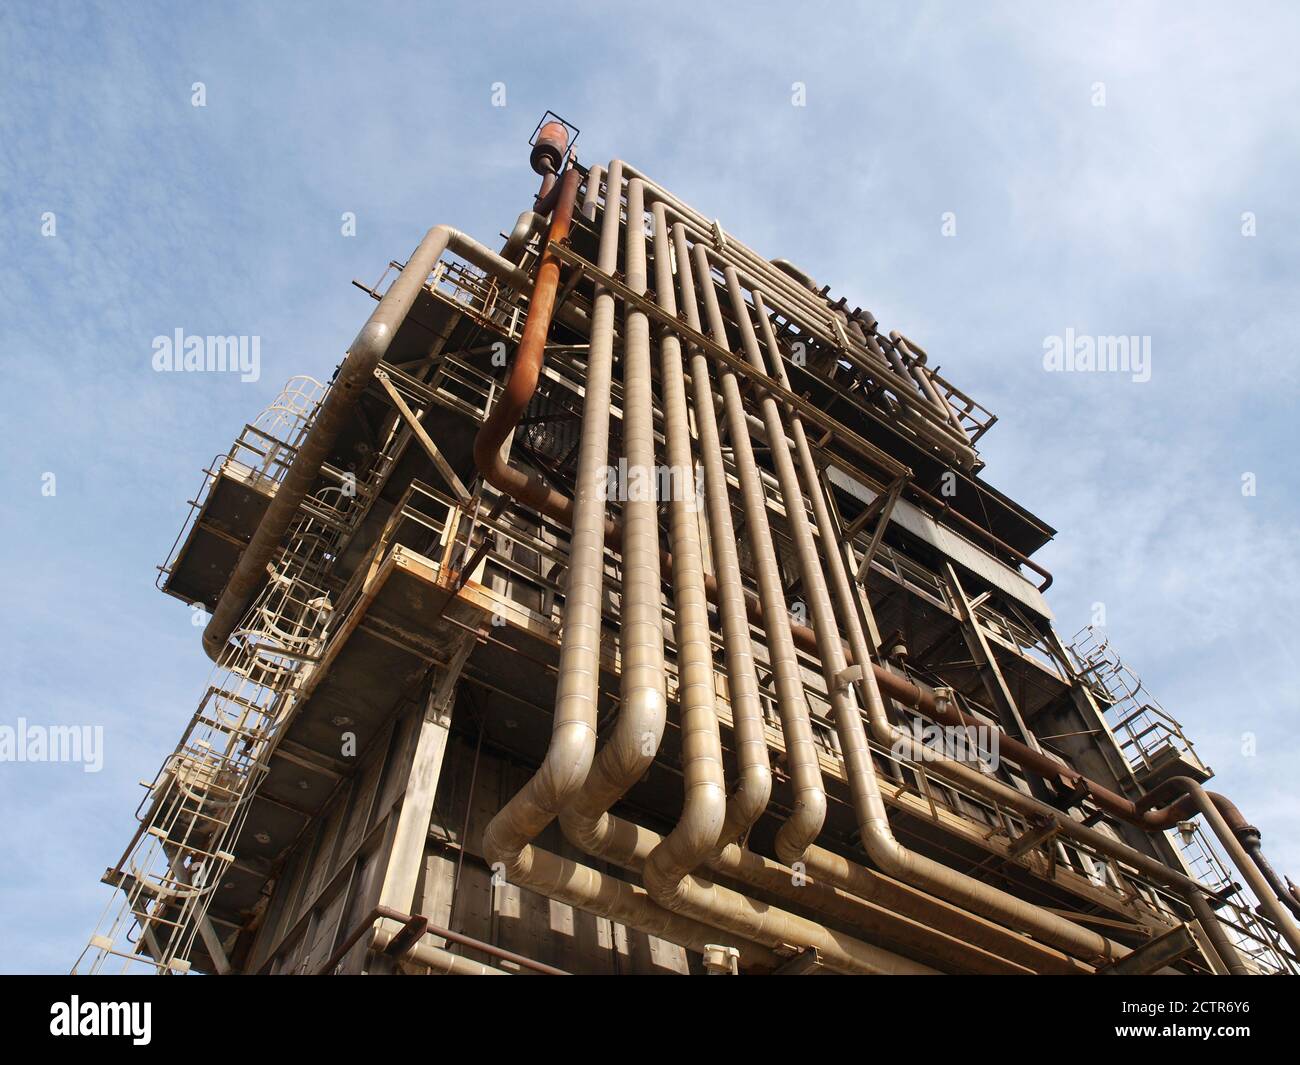 View of old rusty industrial pipe covered oil and petrochemical refinery tower. Stock Photo